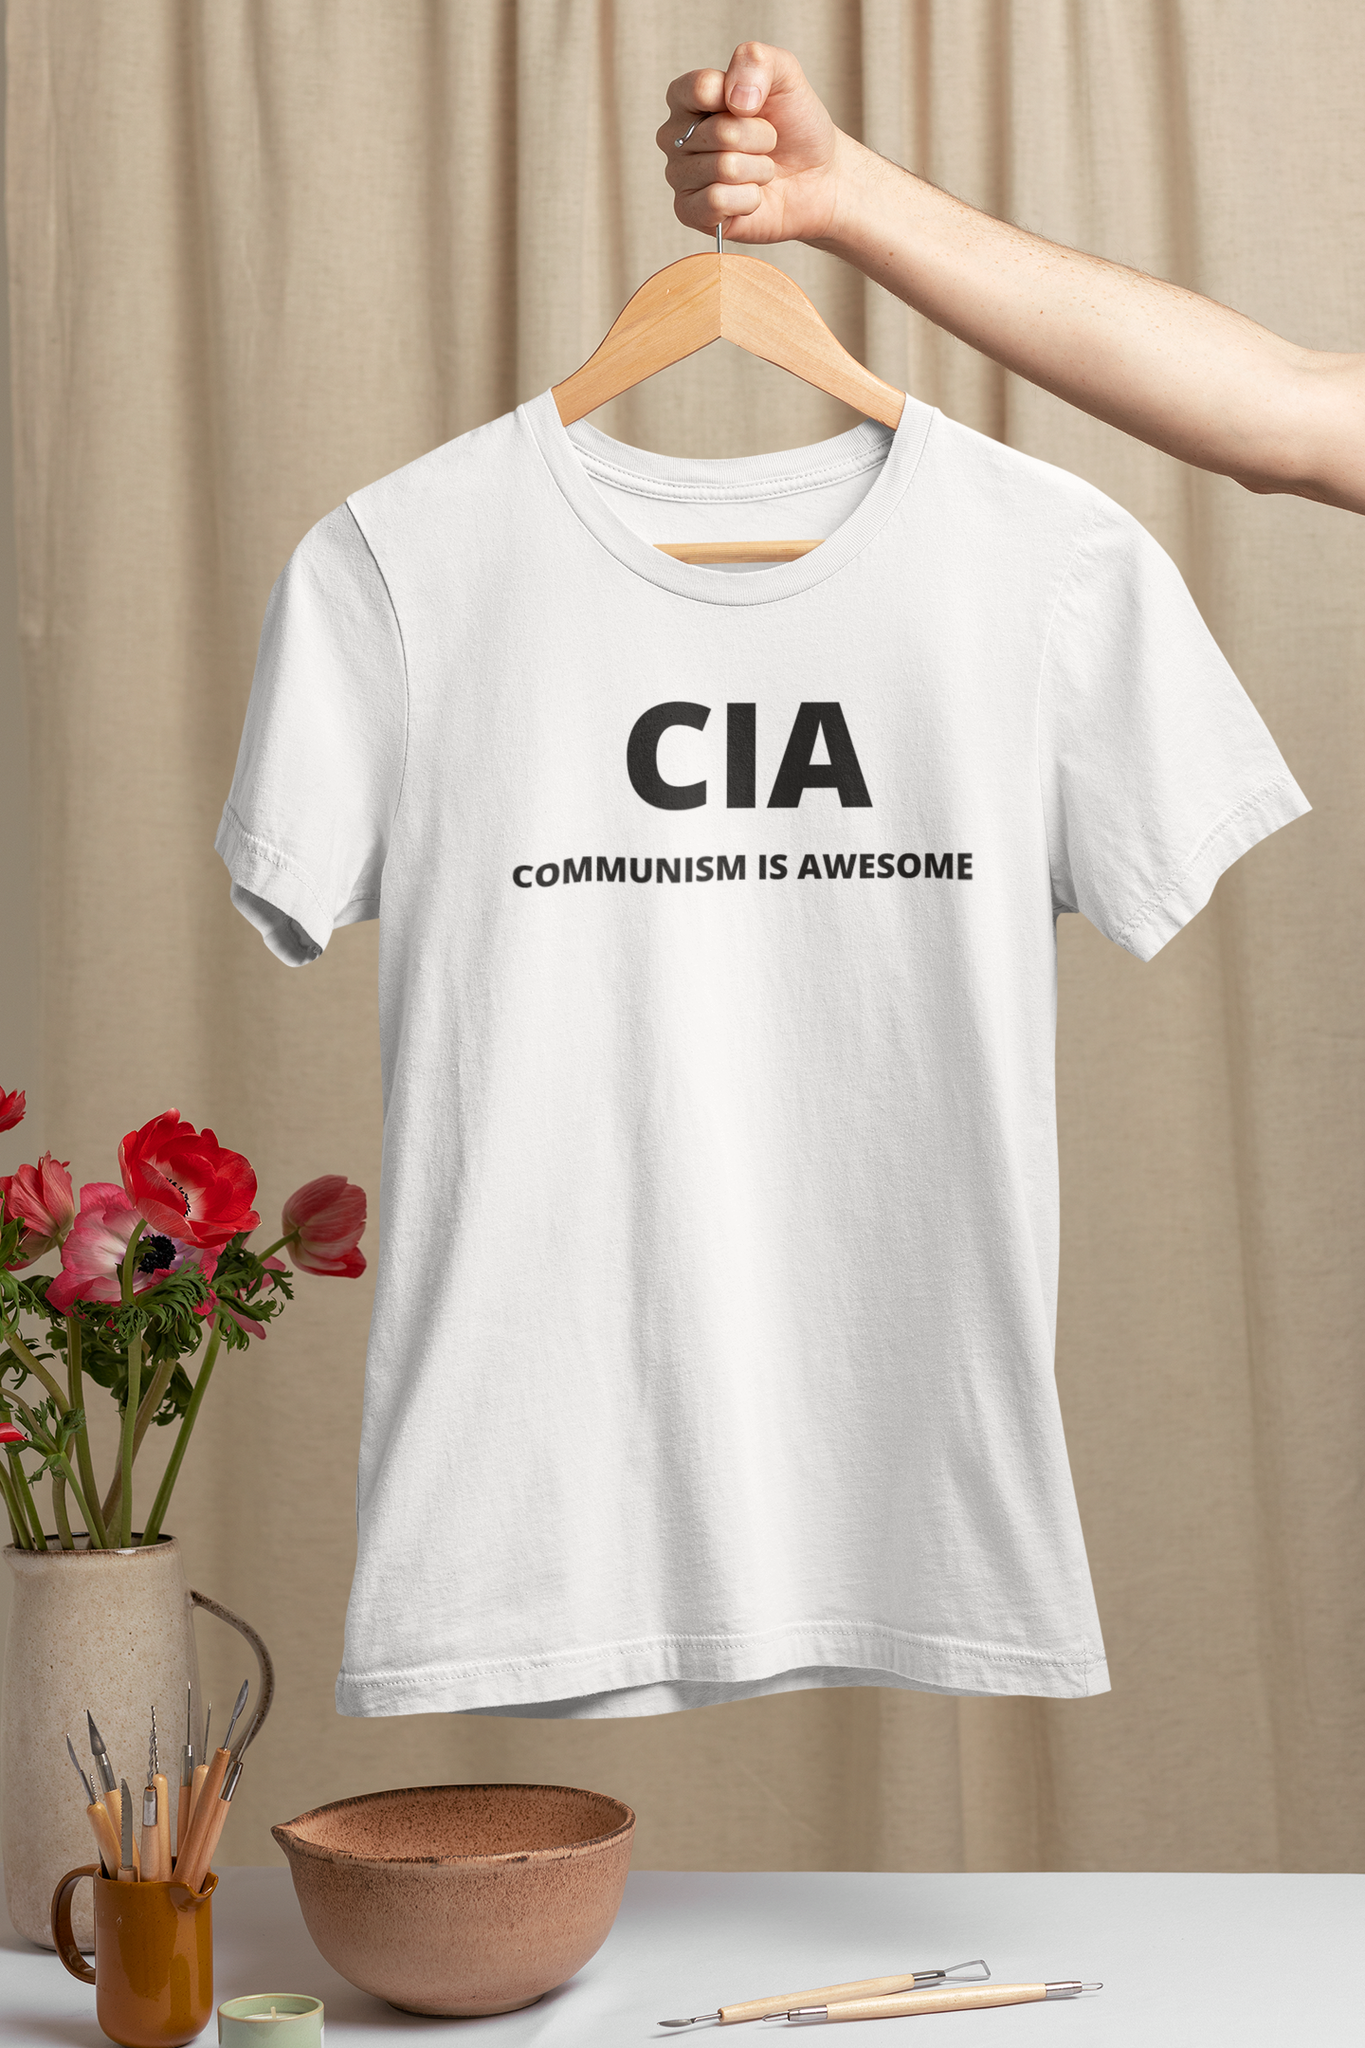 CIA- Communism Is Awesome.